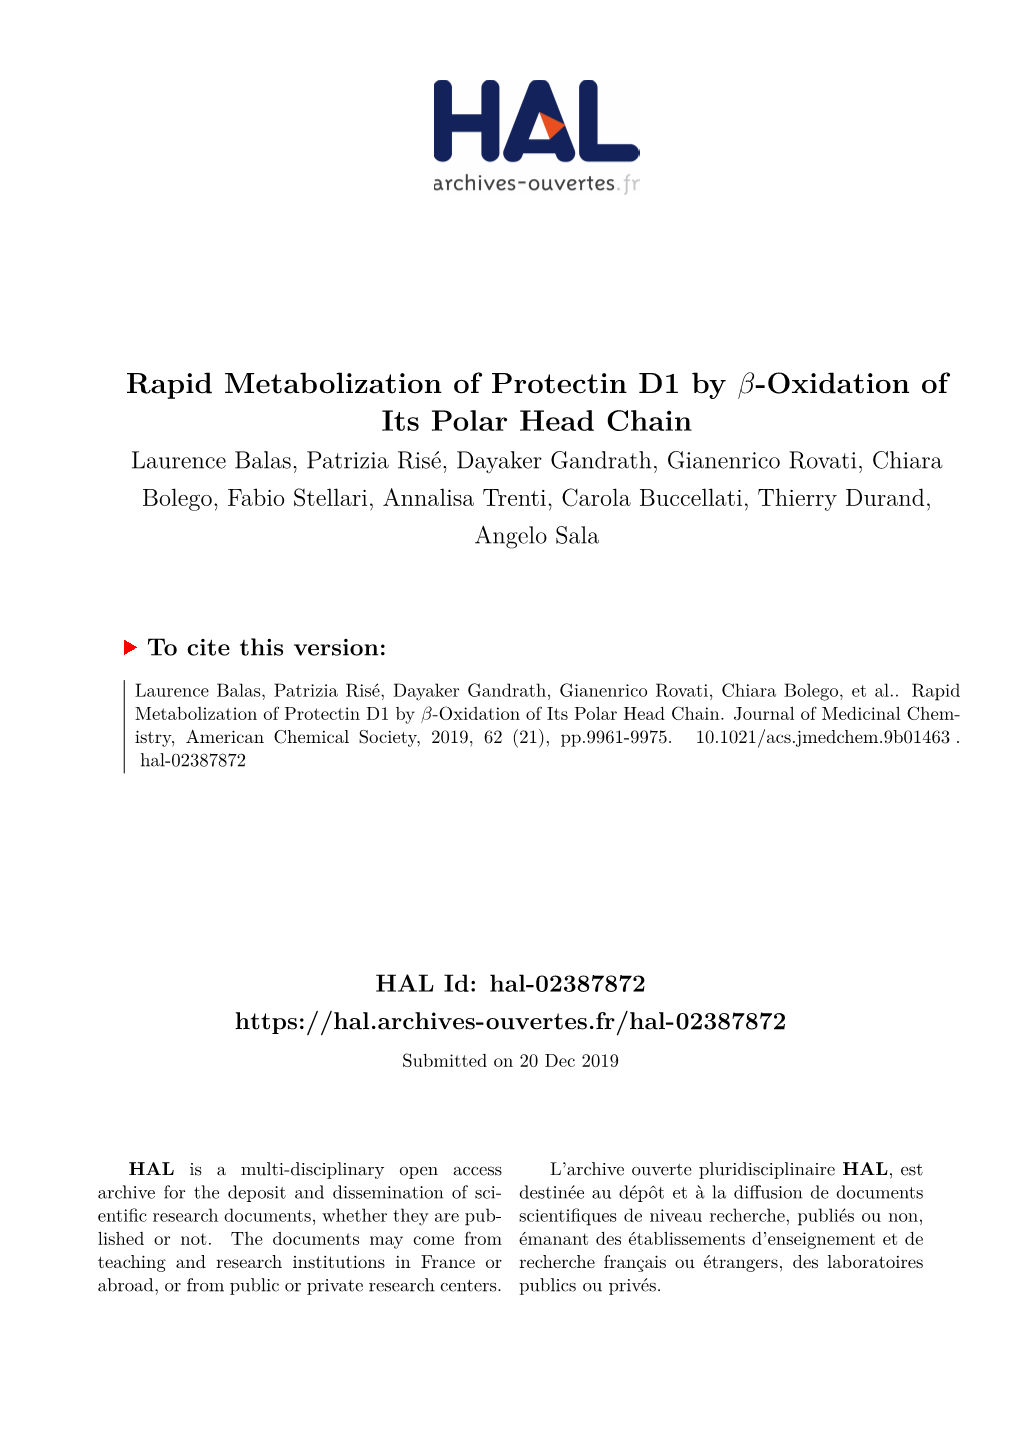 Rapid Metabolization of Protectin D1 by -Oxidation of Its Polar Head Chain